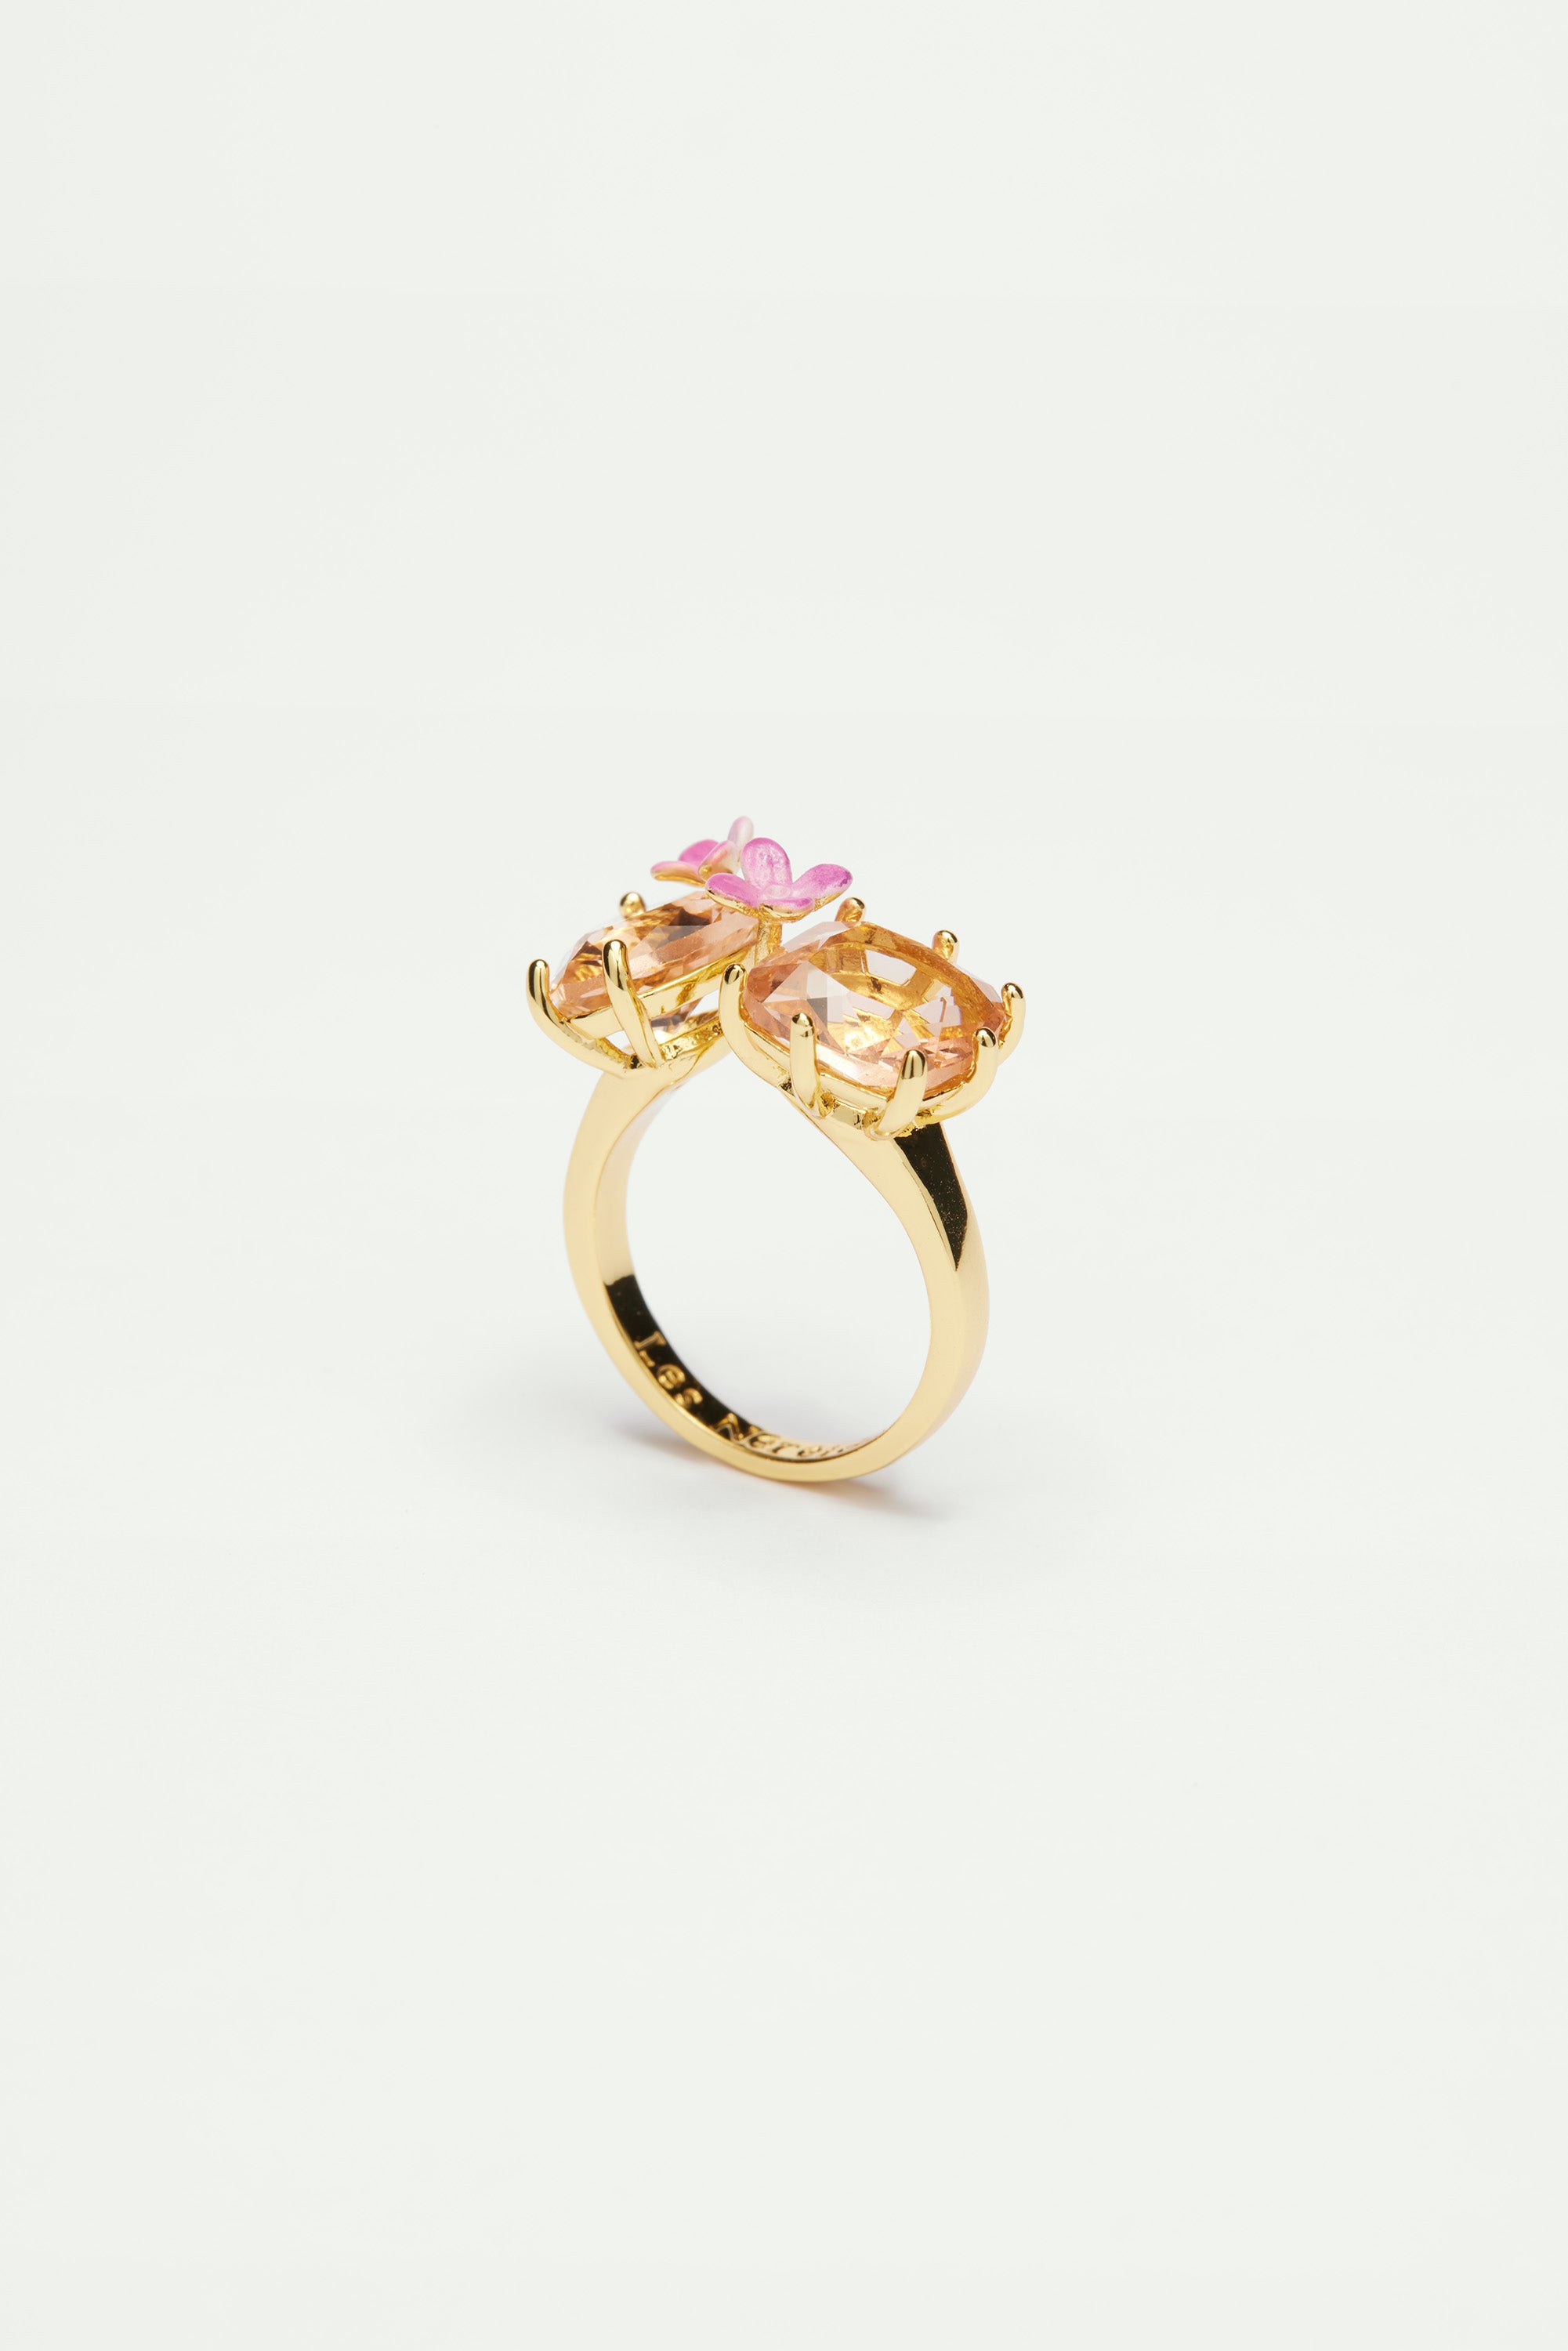 Apricot pink diamantine flower, heart and square stone ring